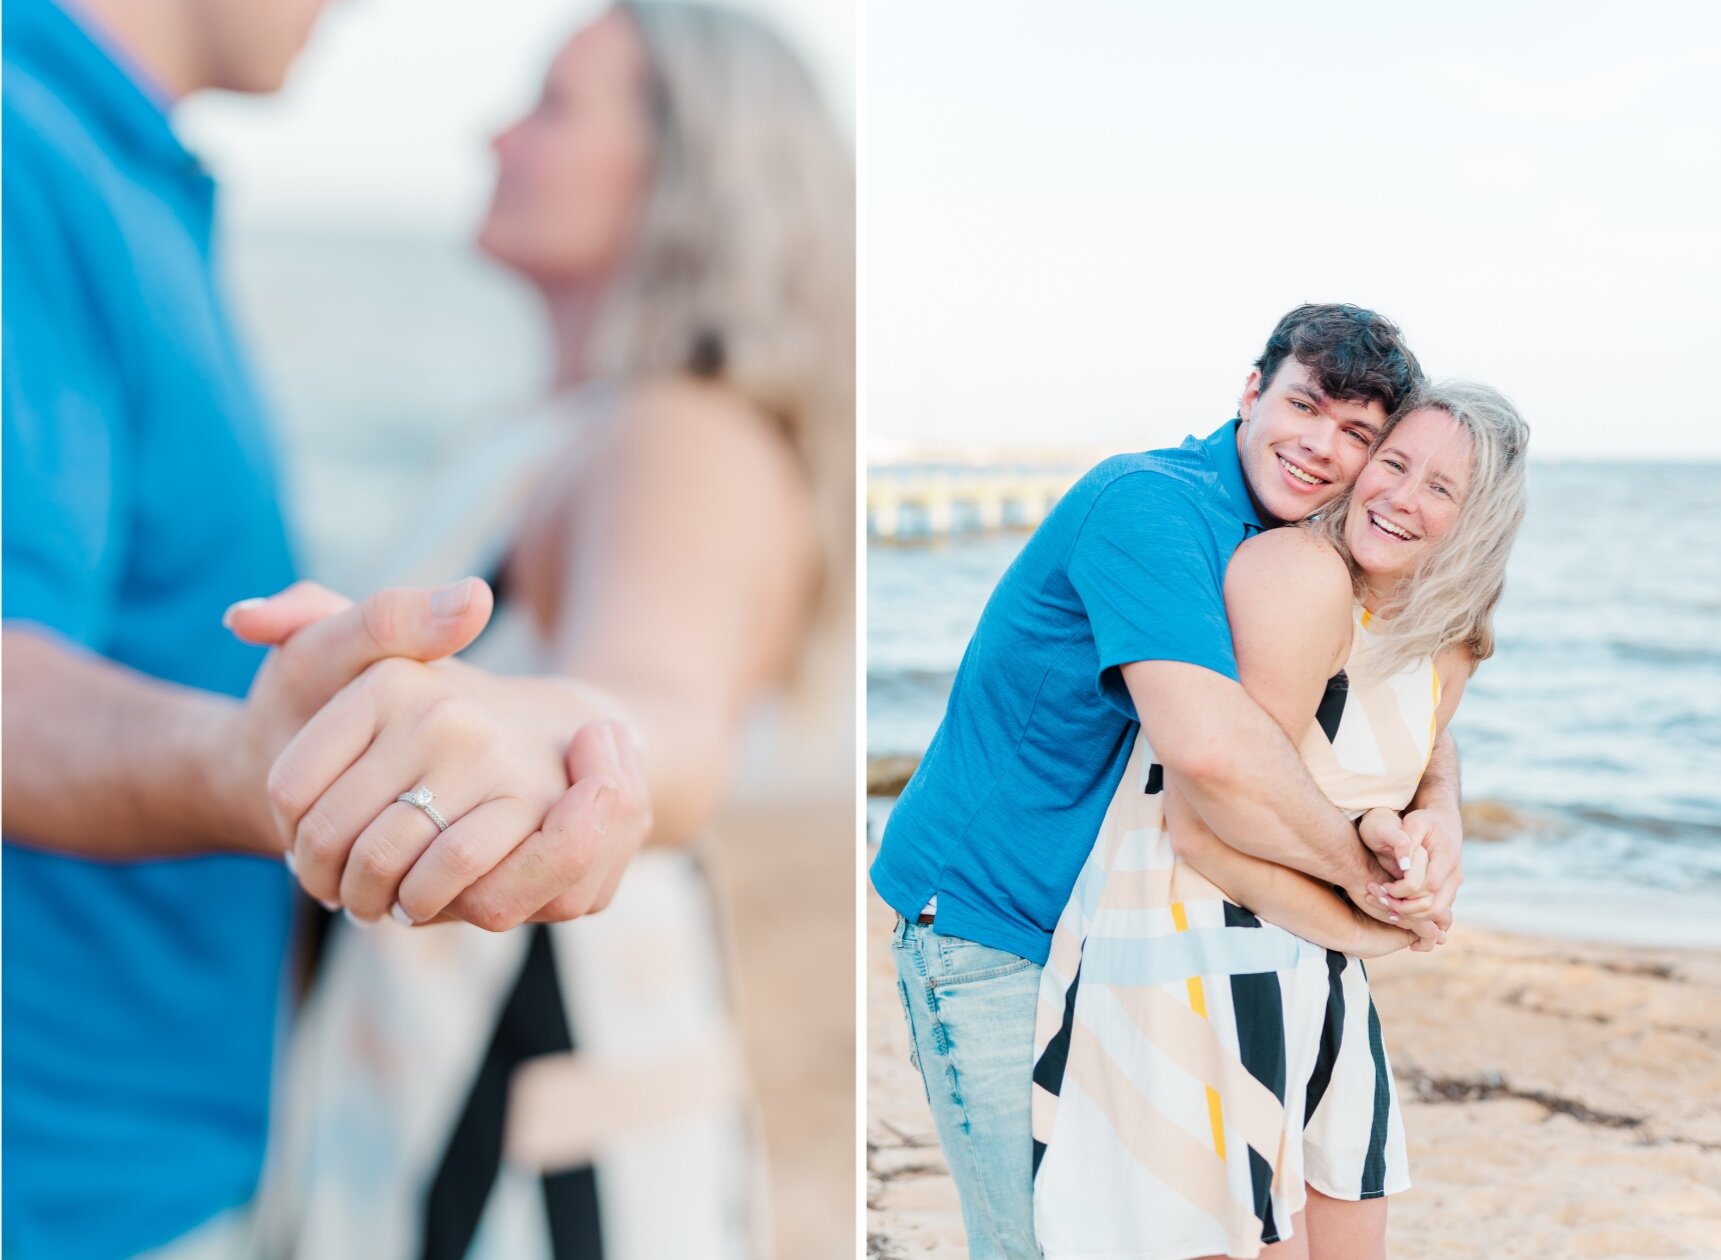 Sunrise Engagement Portrait Session at the Fairhope Pier in August Photographed by Kristen Marcus Photography